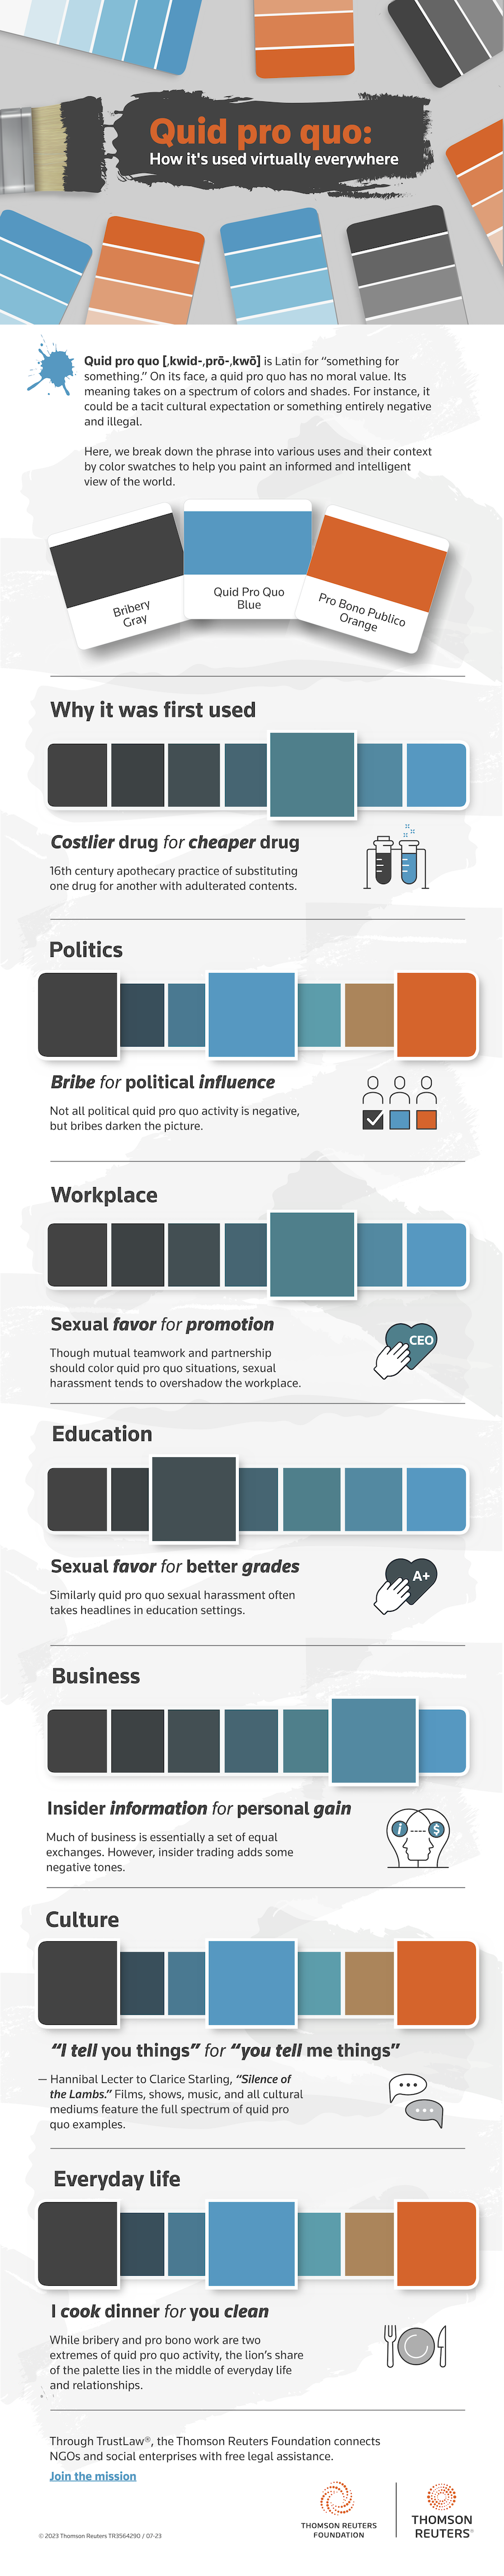 Infographic about quid pro quo with definition and examples